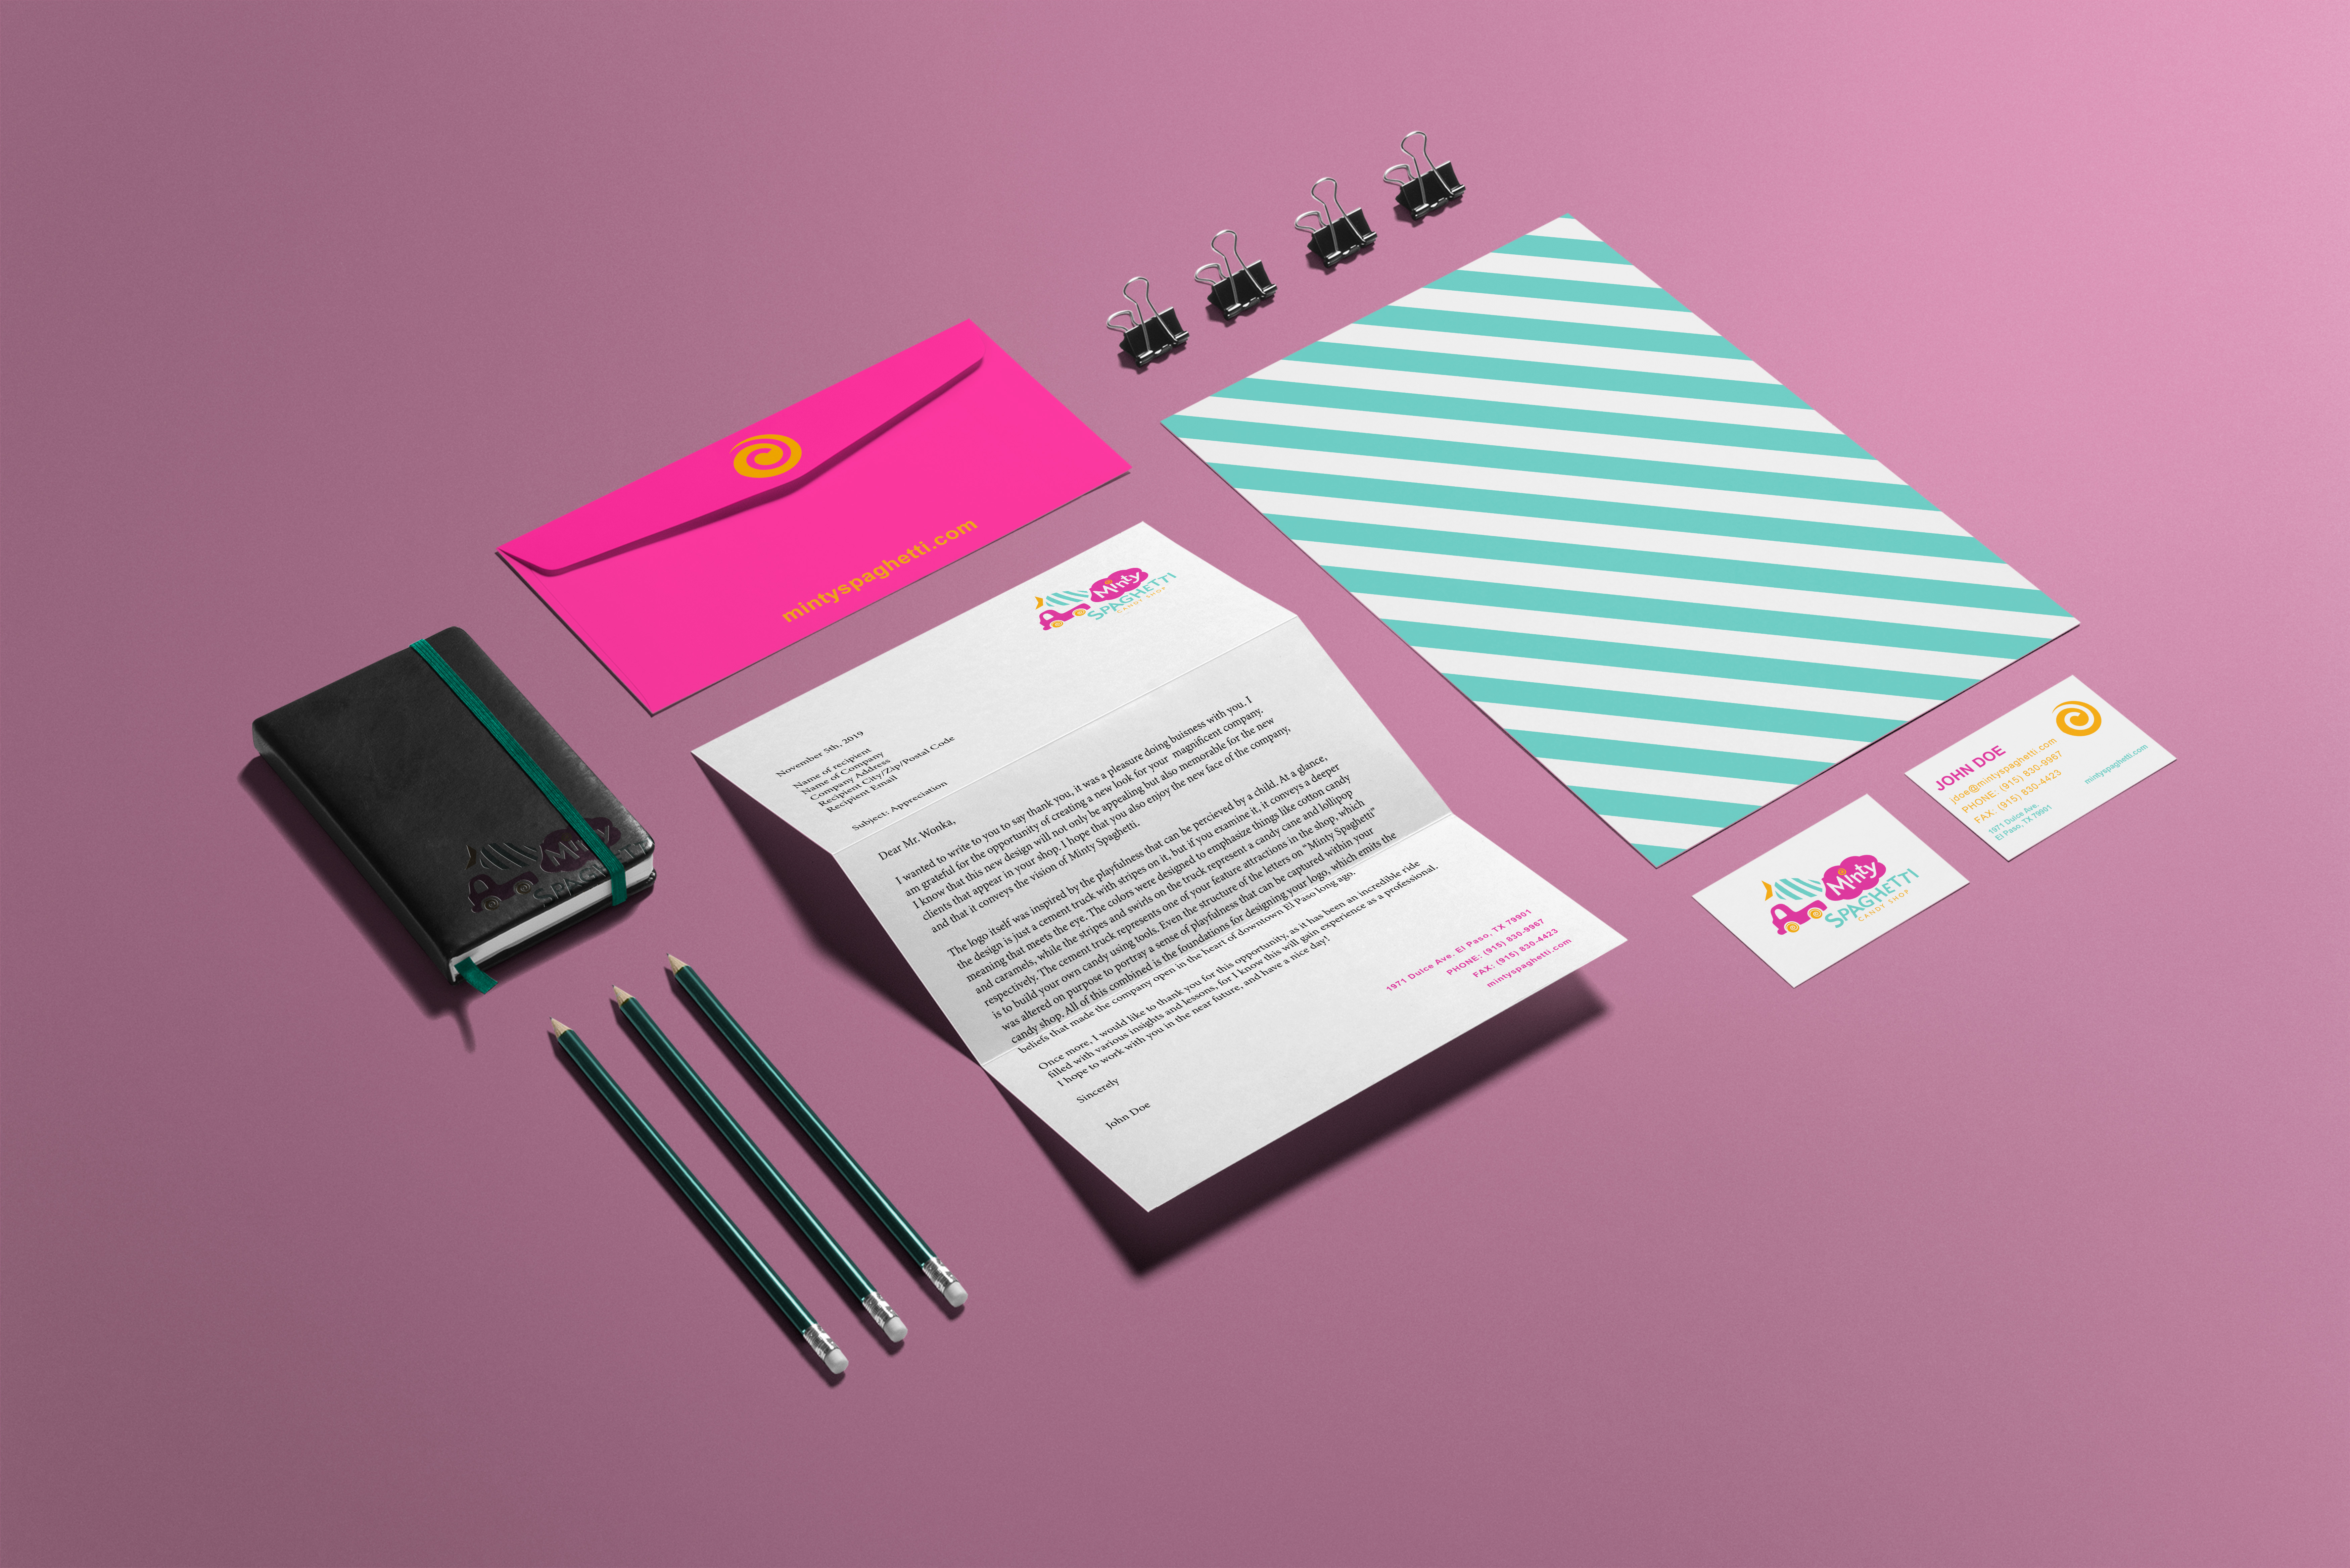 Stationary material for Minty Spaghetti Candy Shop, including a detailed notebook, letter pamphlet, pencils, stationary paper, and business cards